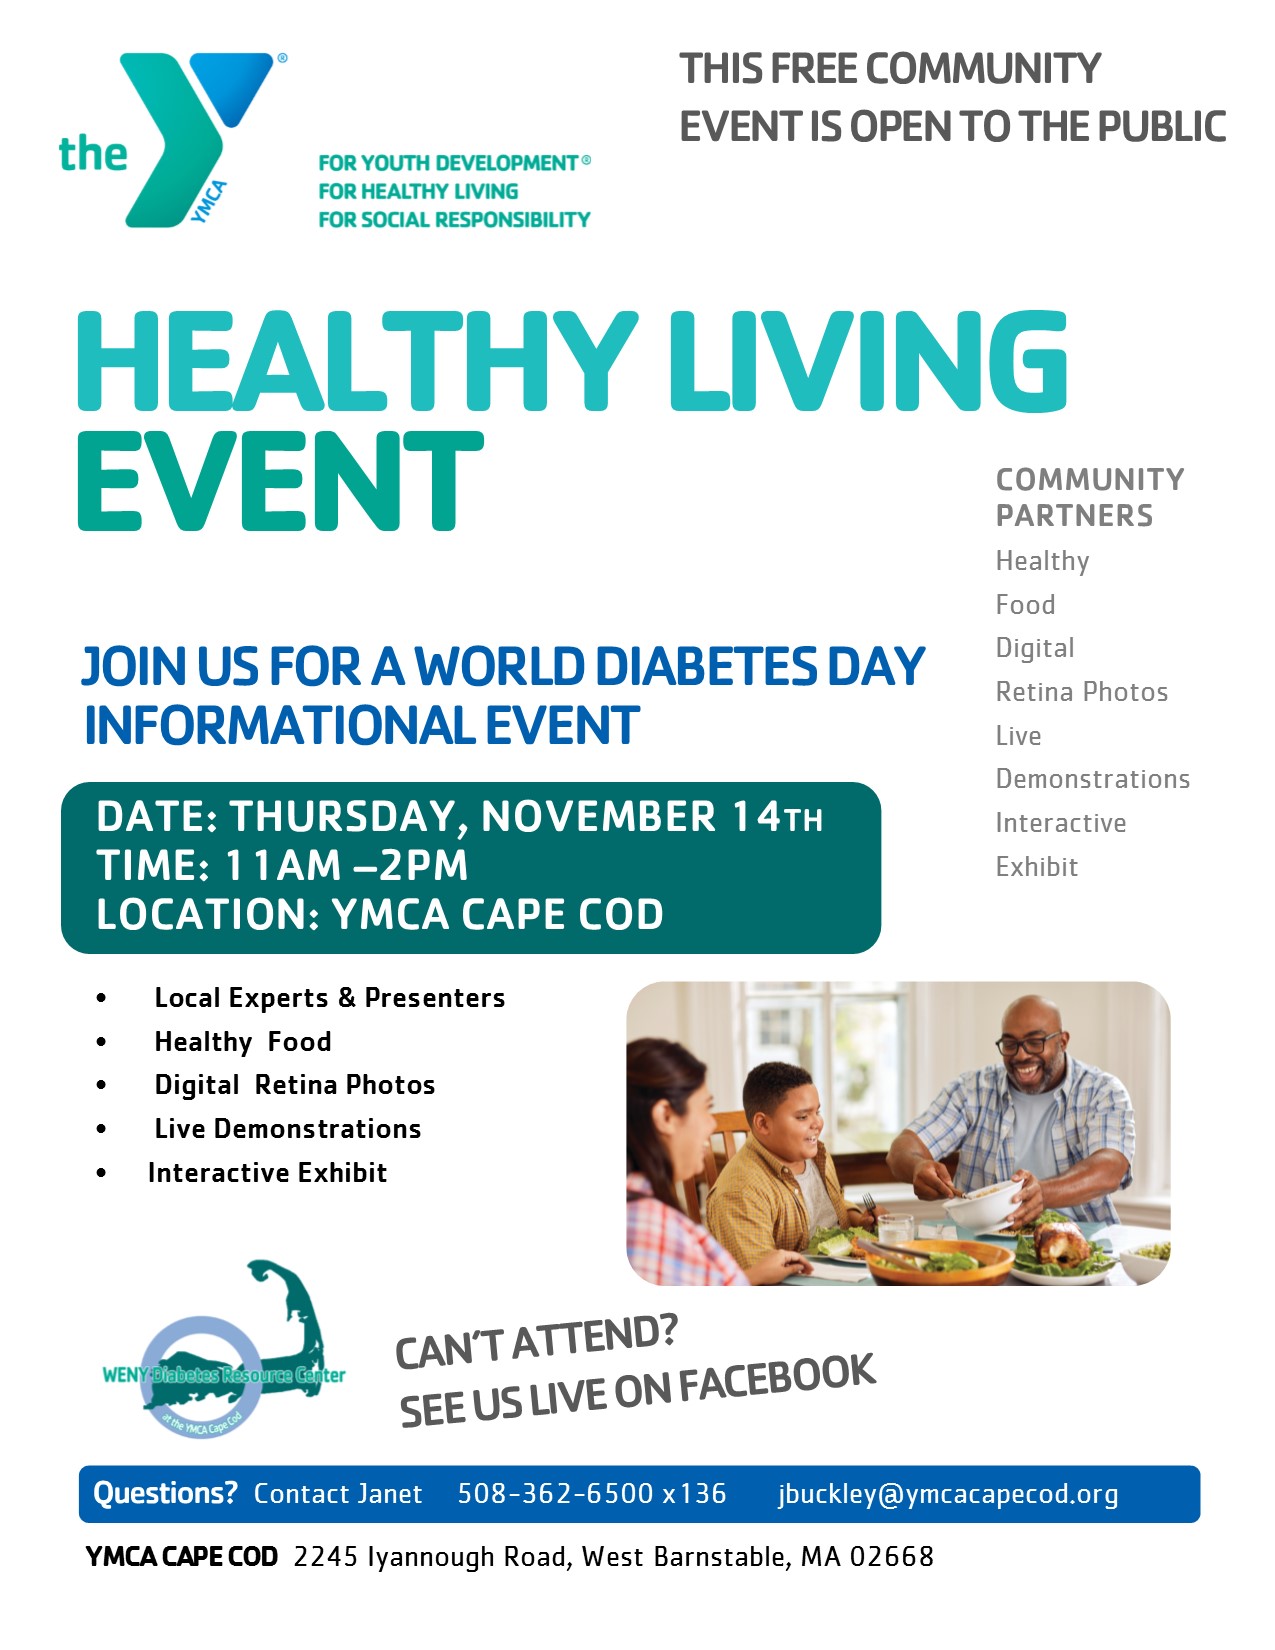 World Diabetes Day Informational Event @ YMCA Cape Cod